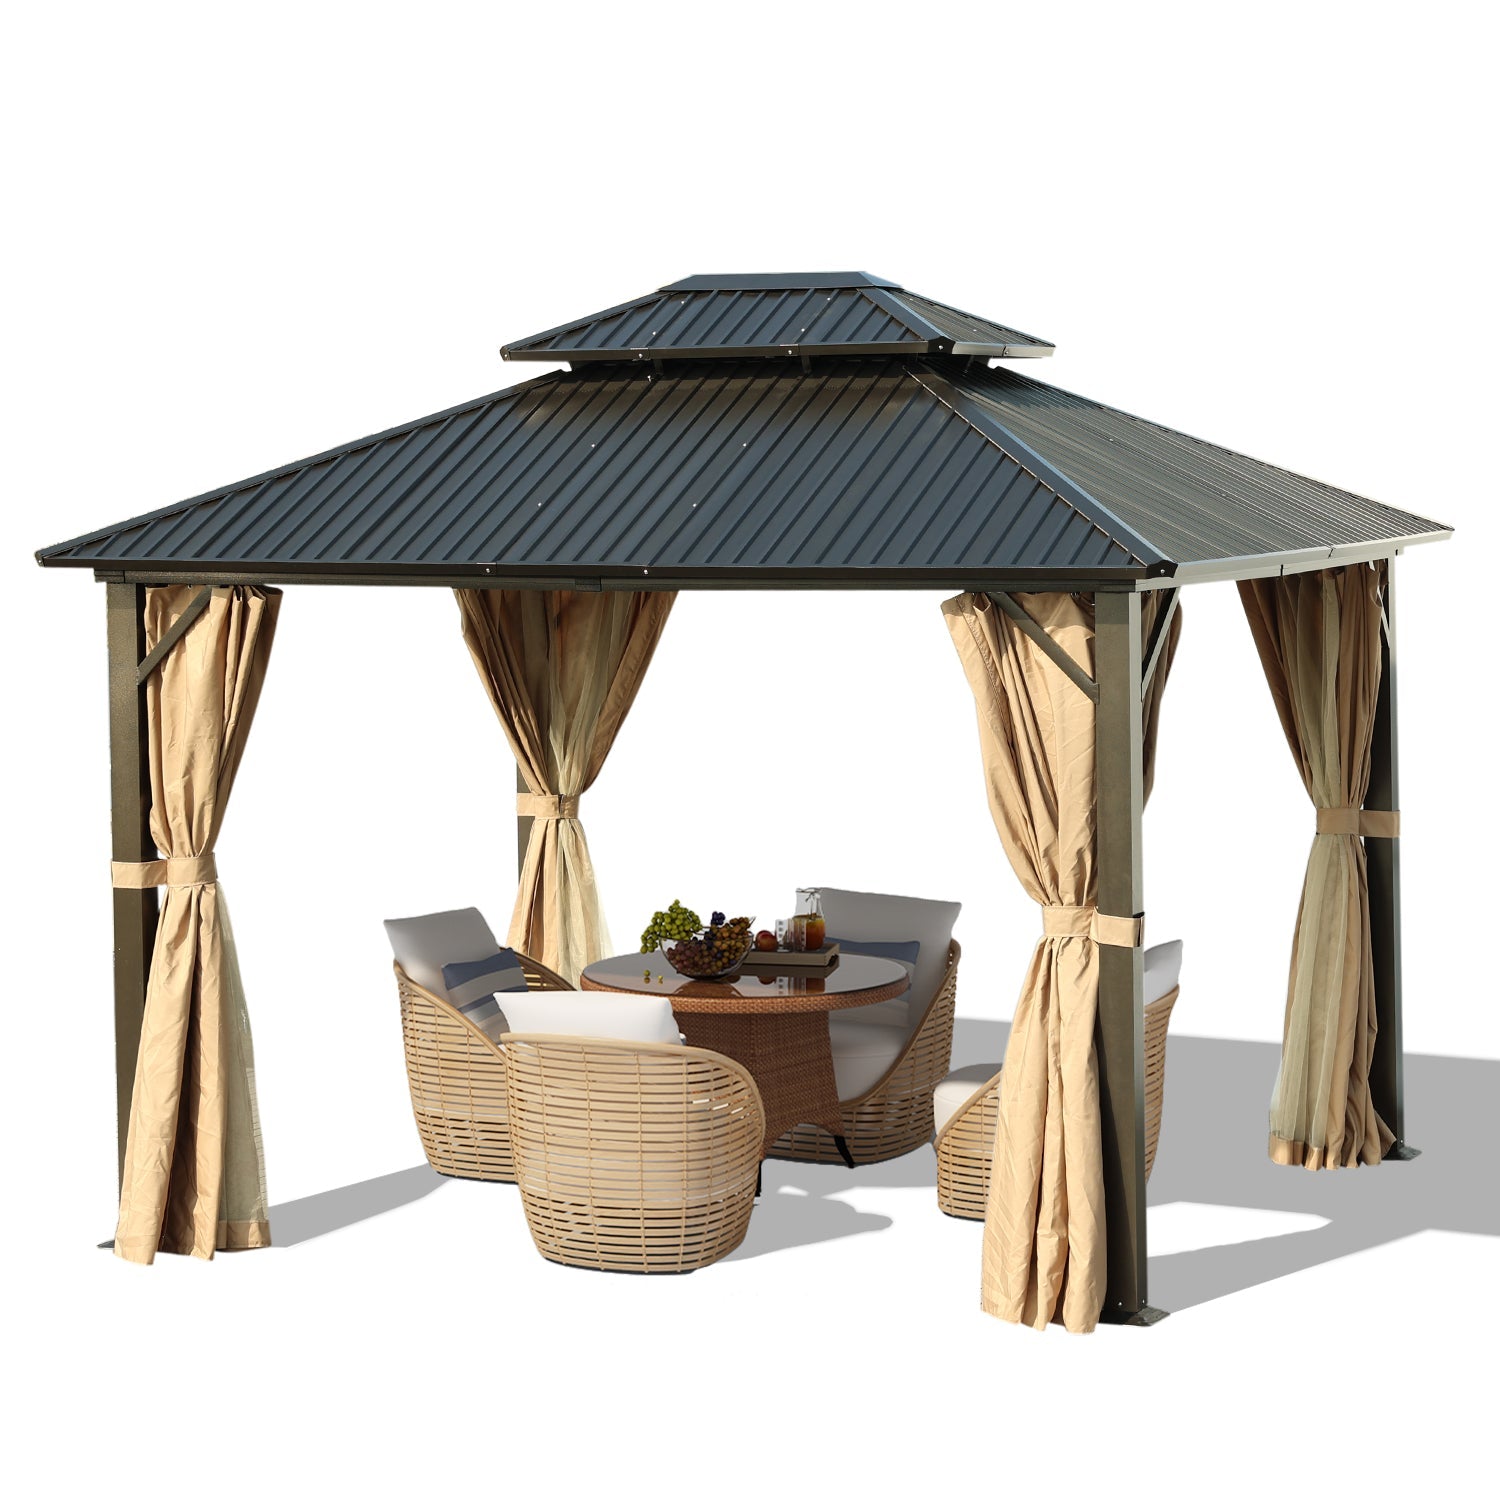 12 x 10 ft. Aluminum Frame Hardtop Roof Gazebo, Outdoor Patio 2-Tier Metal Roof Gazebo with Mosquito Netting and Curtains, Suitable for Patios, Garden and Backyard - Black - Aoodor